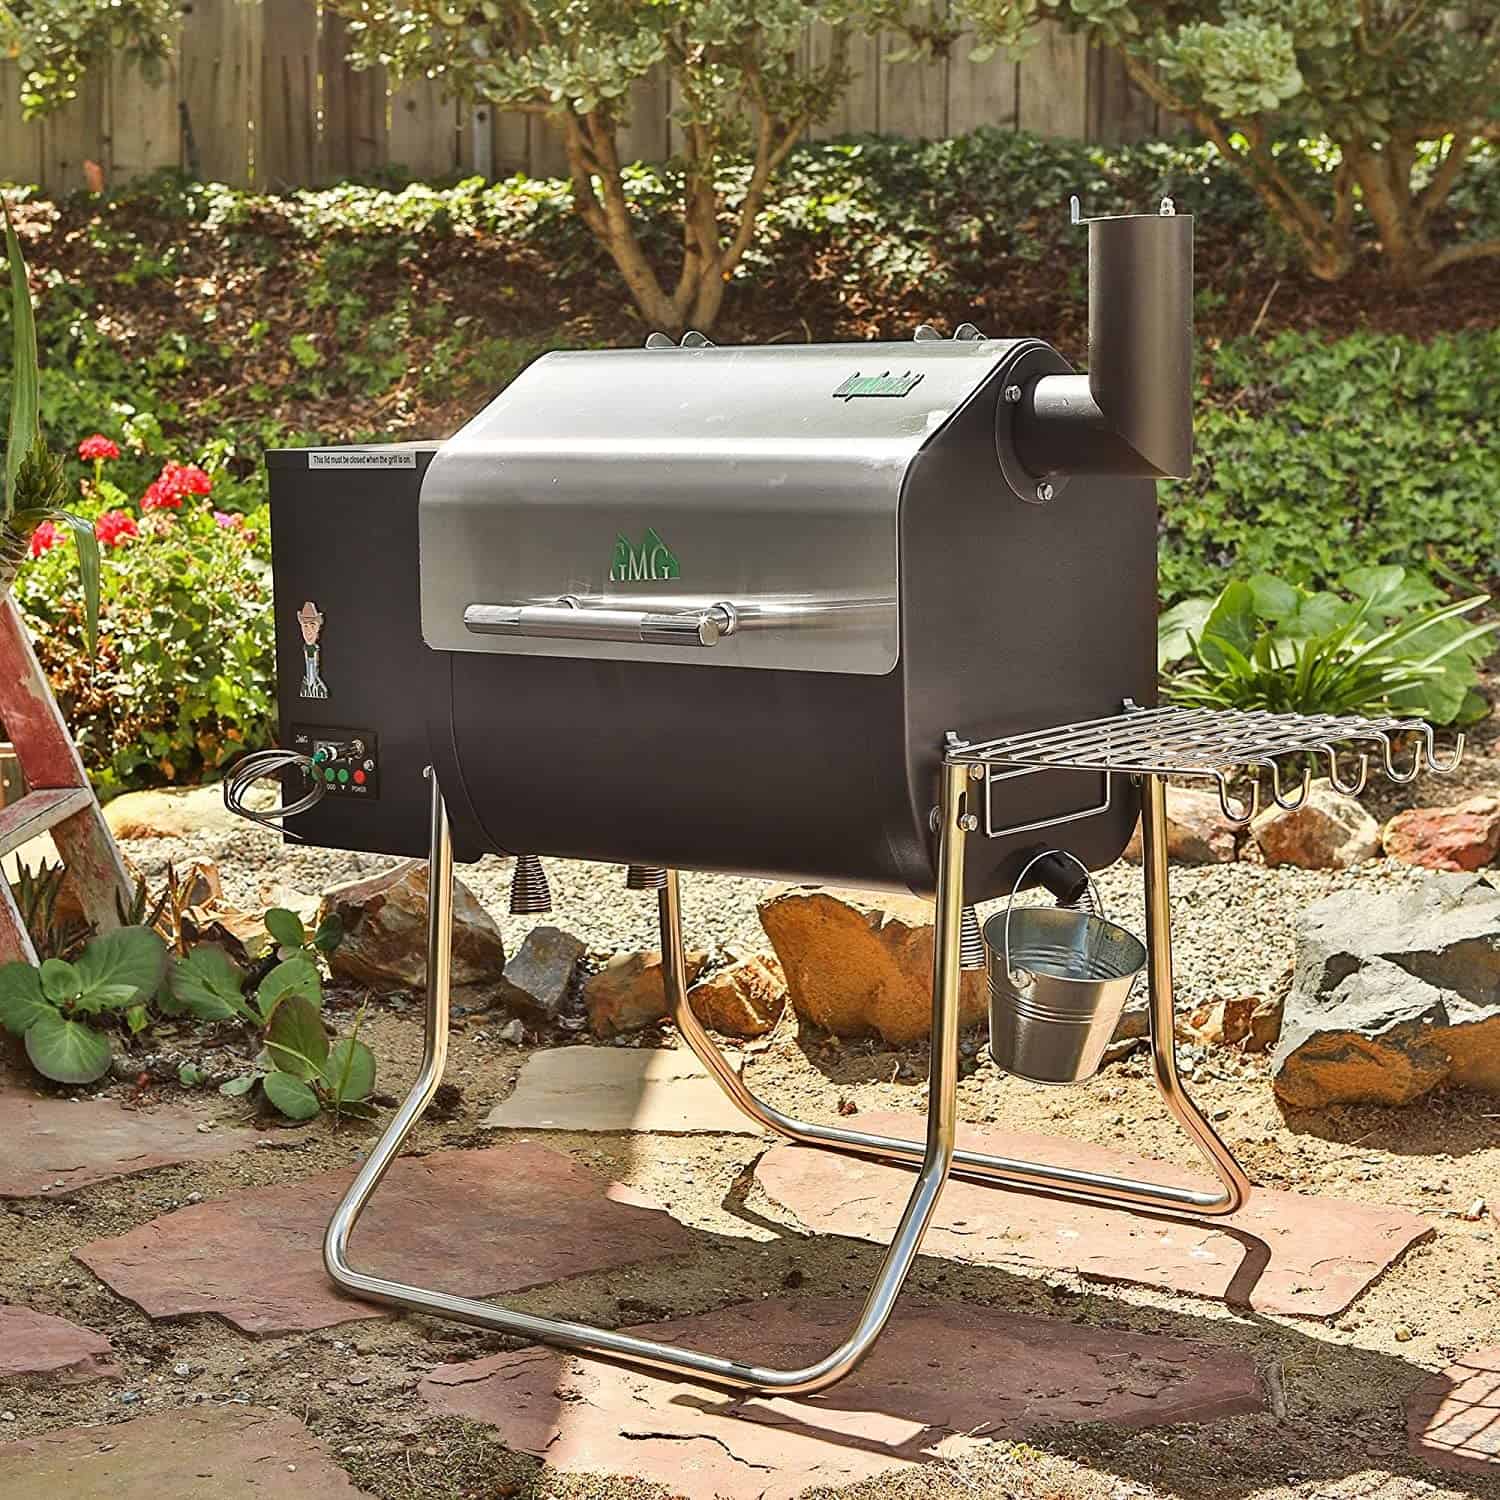 Best small pellet grill for smoking and grilling- GMG Davy Crockett in the garden